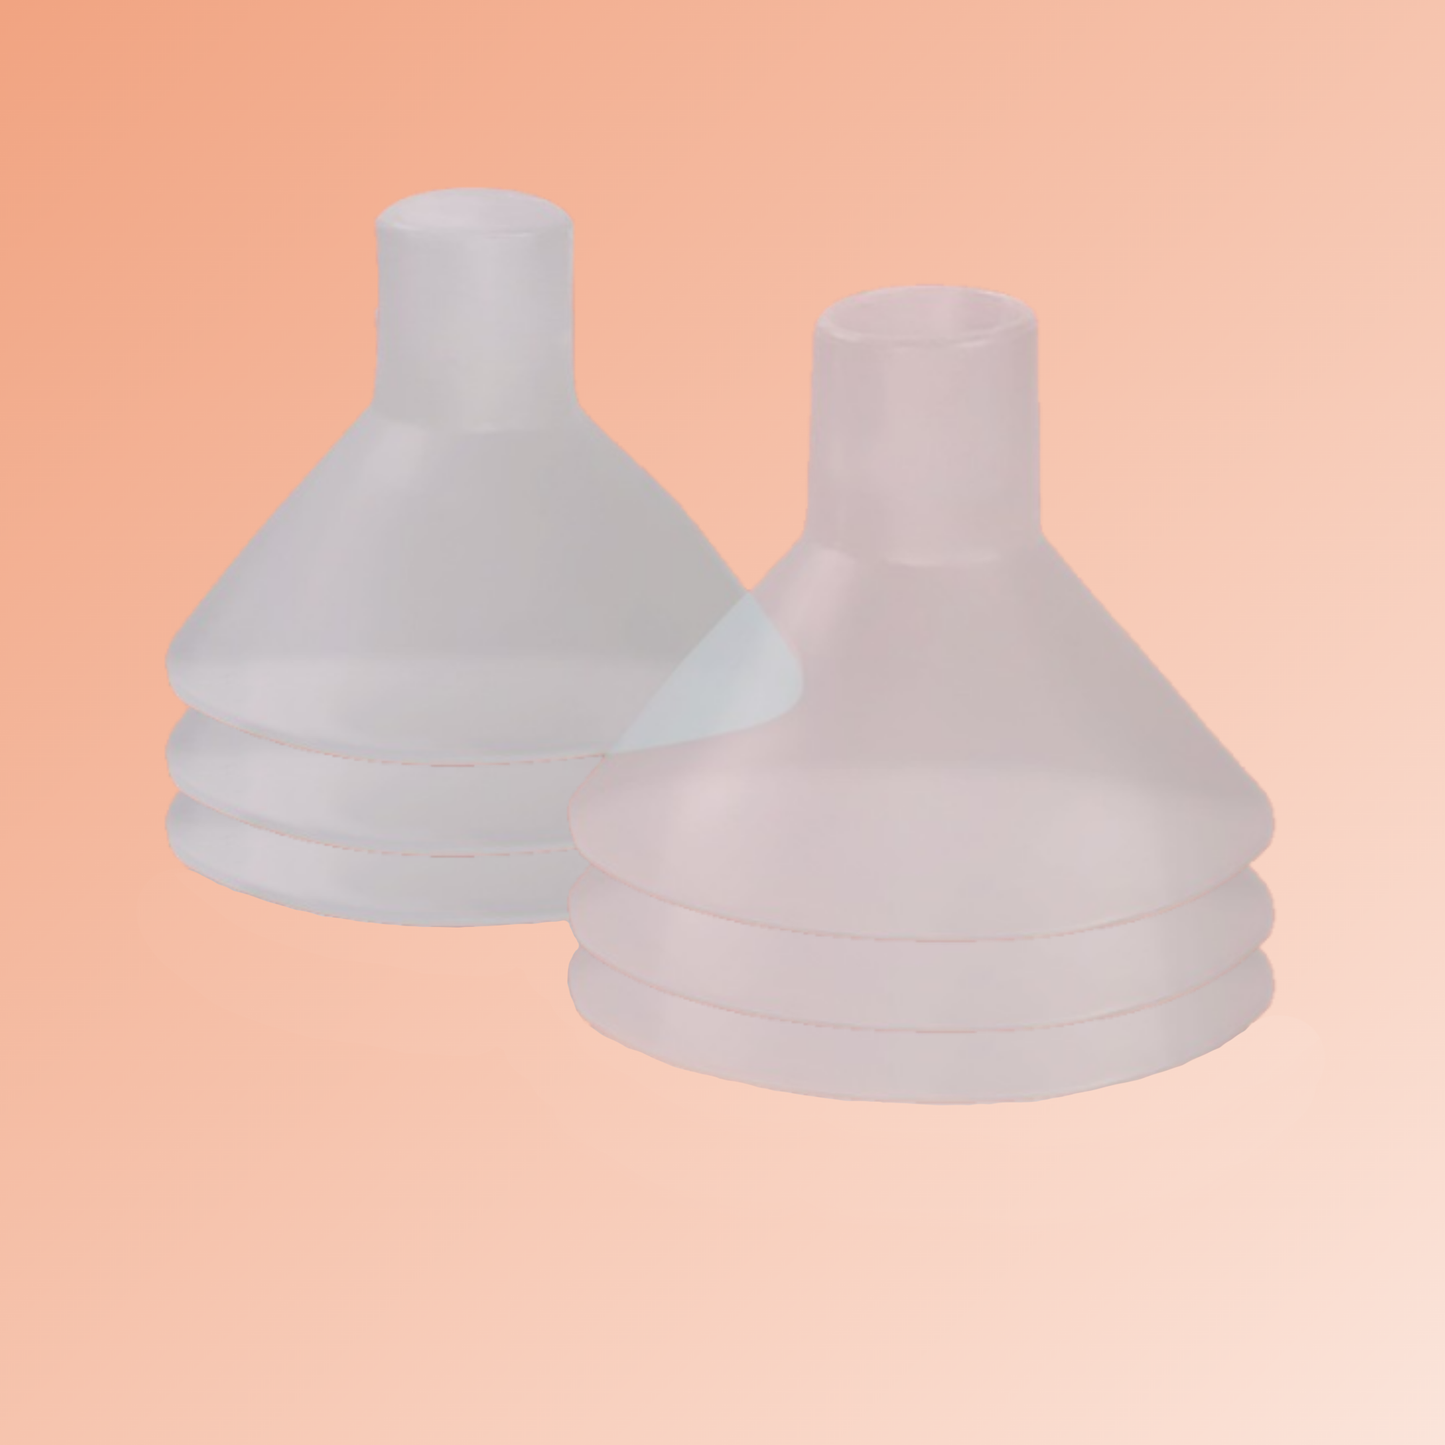 Order three pair of our friction reducing breast pump cushions to save time as well as your pumping journey.